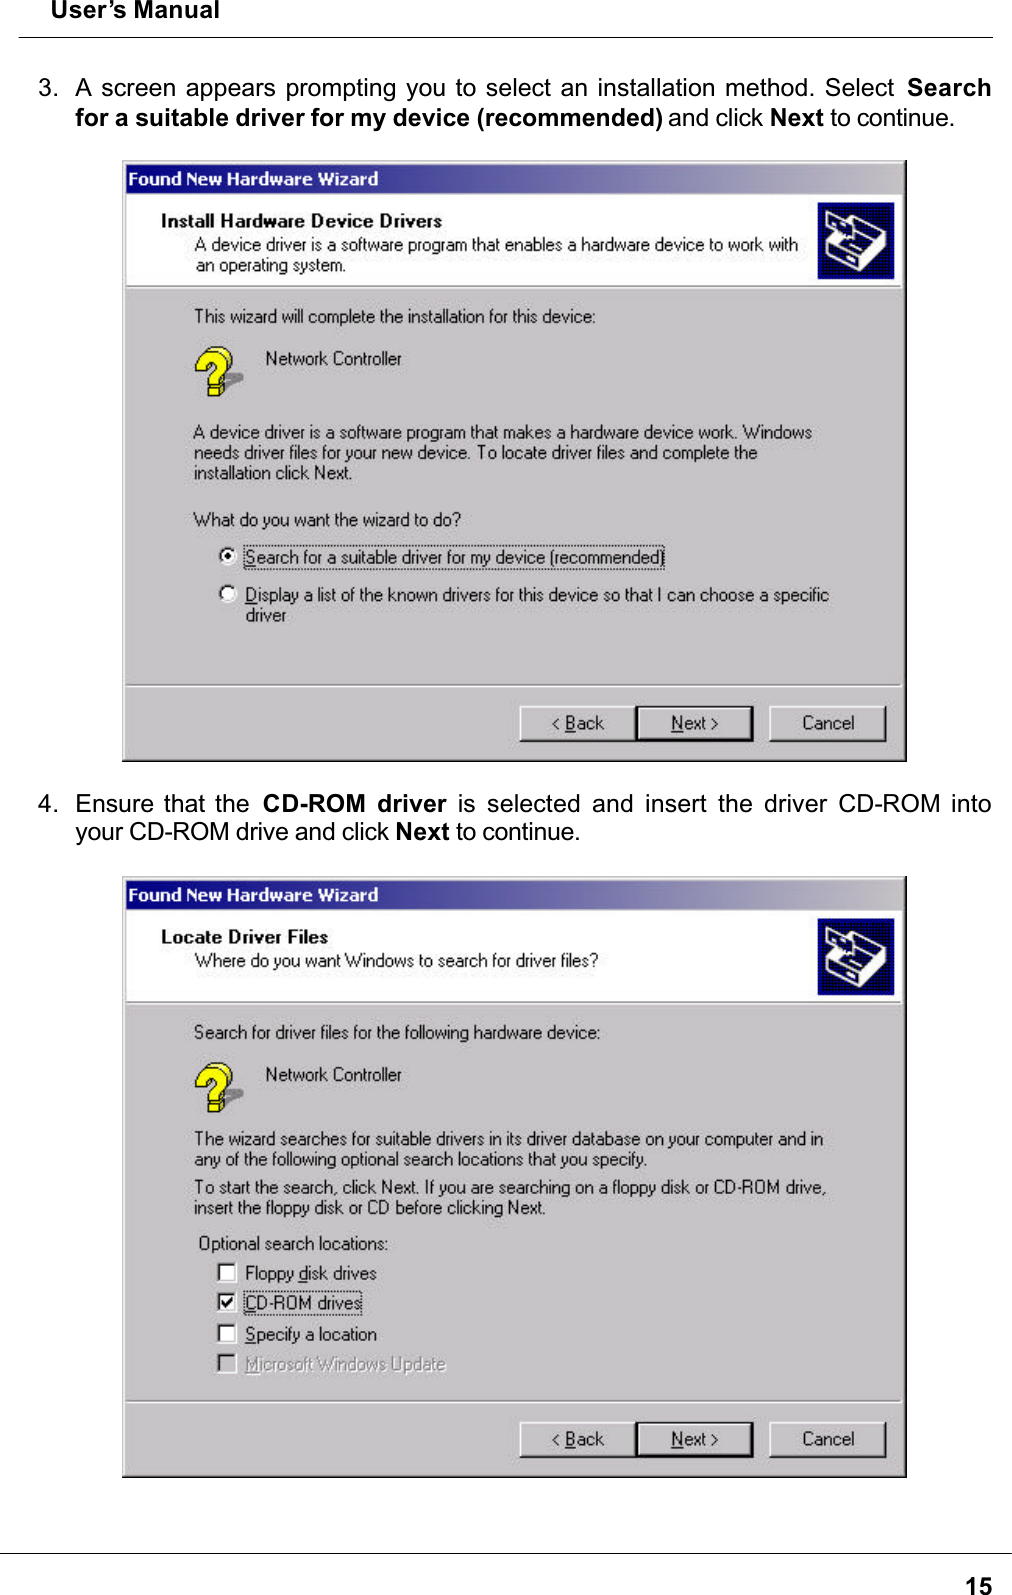  User’s Manual153. A screen appears prompting you to select an installation method. Select  Searchfor a suitable driver for my device (recommended) and click Next to continue.4. Ensure that the  CD-ROM driver is selected and insert the driver CD-ROM into your CD-ROM drive and click Next to continue.